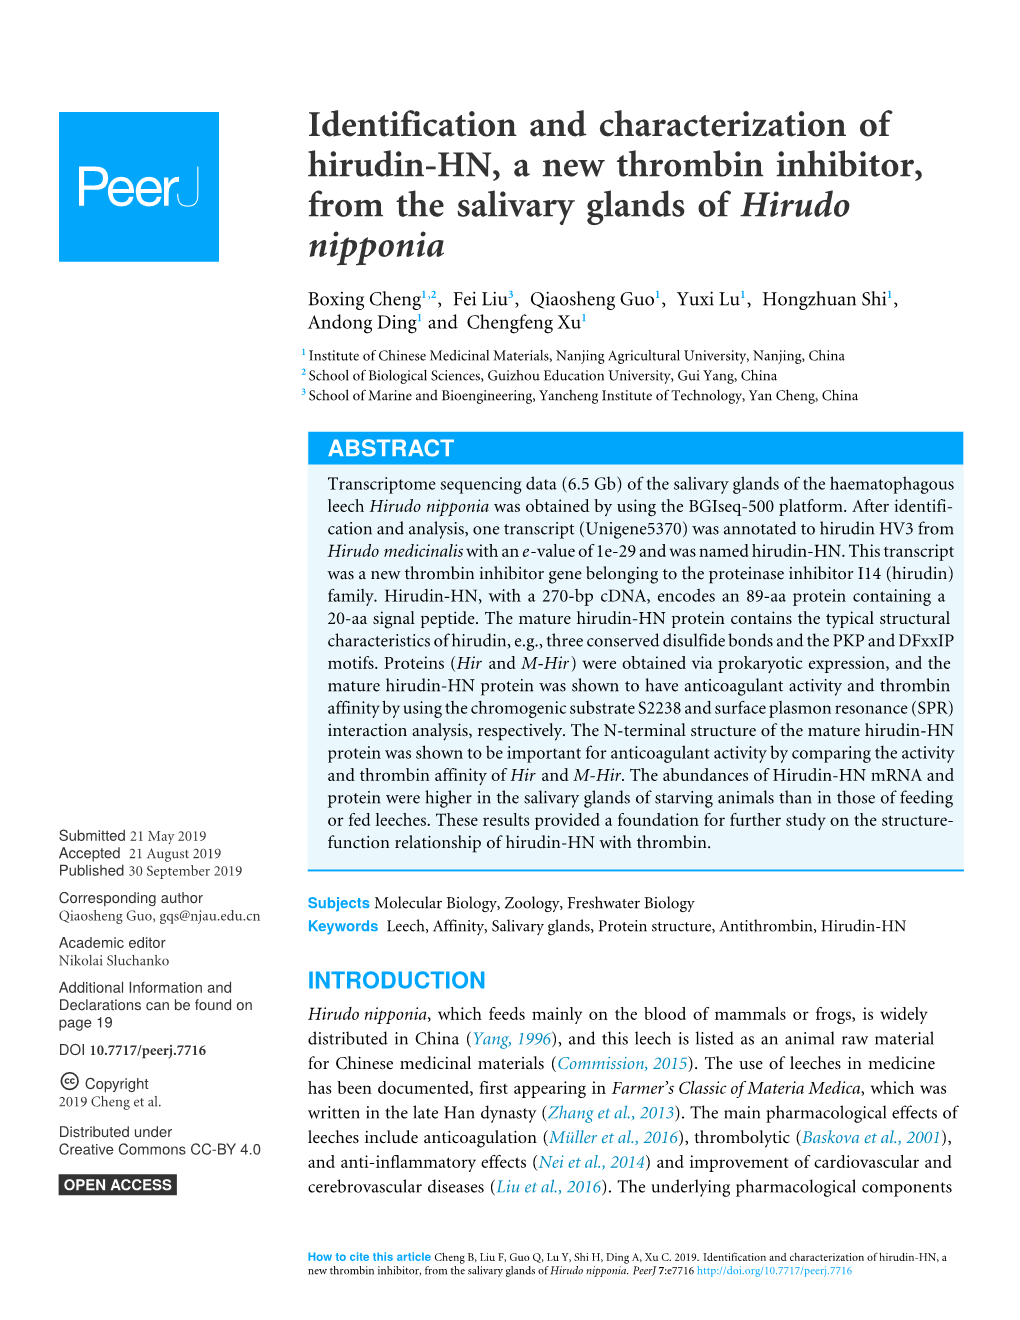 Identification and Characterization of Hirudin-HN, a New Thrombin Inhibitor, from the Salivary Glands of Hirudo Nipponia